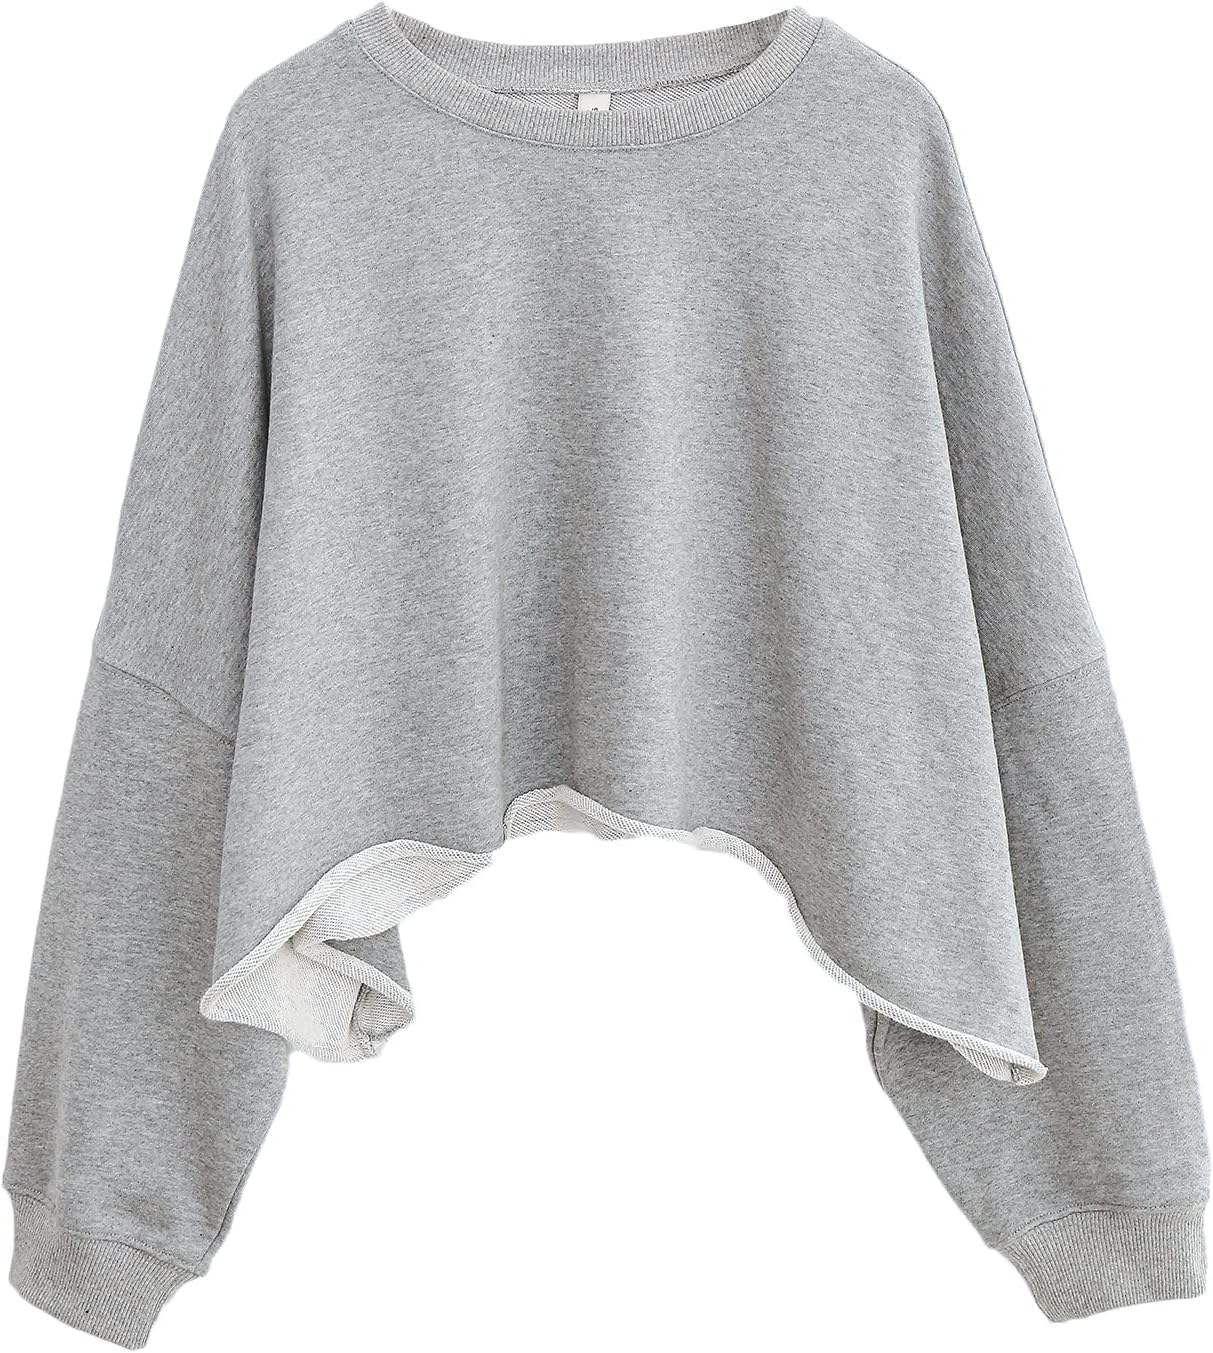 NTG Fad Heather Grey / X-Small Cropped Hoodie Pullover Crewneck Crop Tops Oversize Fit